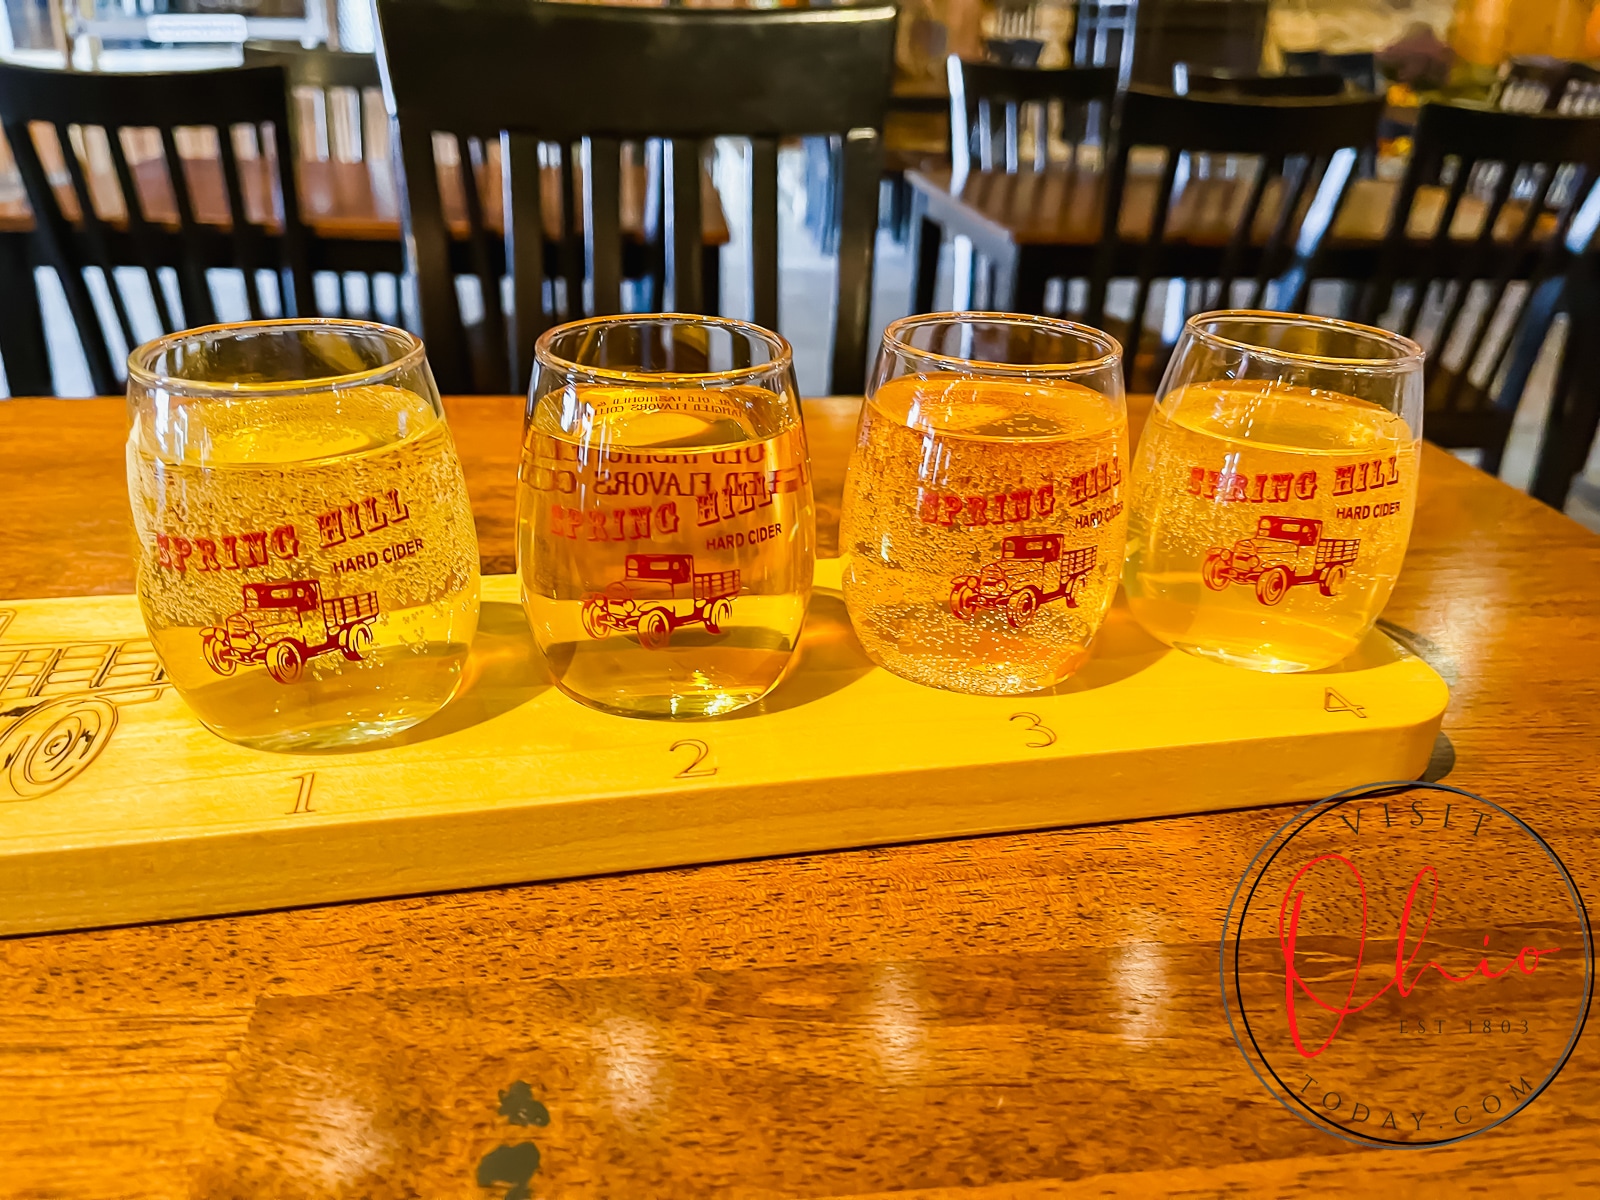 4 small glasses of spring hill winery ciders on a wooden board Photo credit: Cindy Gordon of VisitOhioToday.com